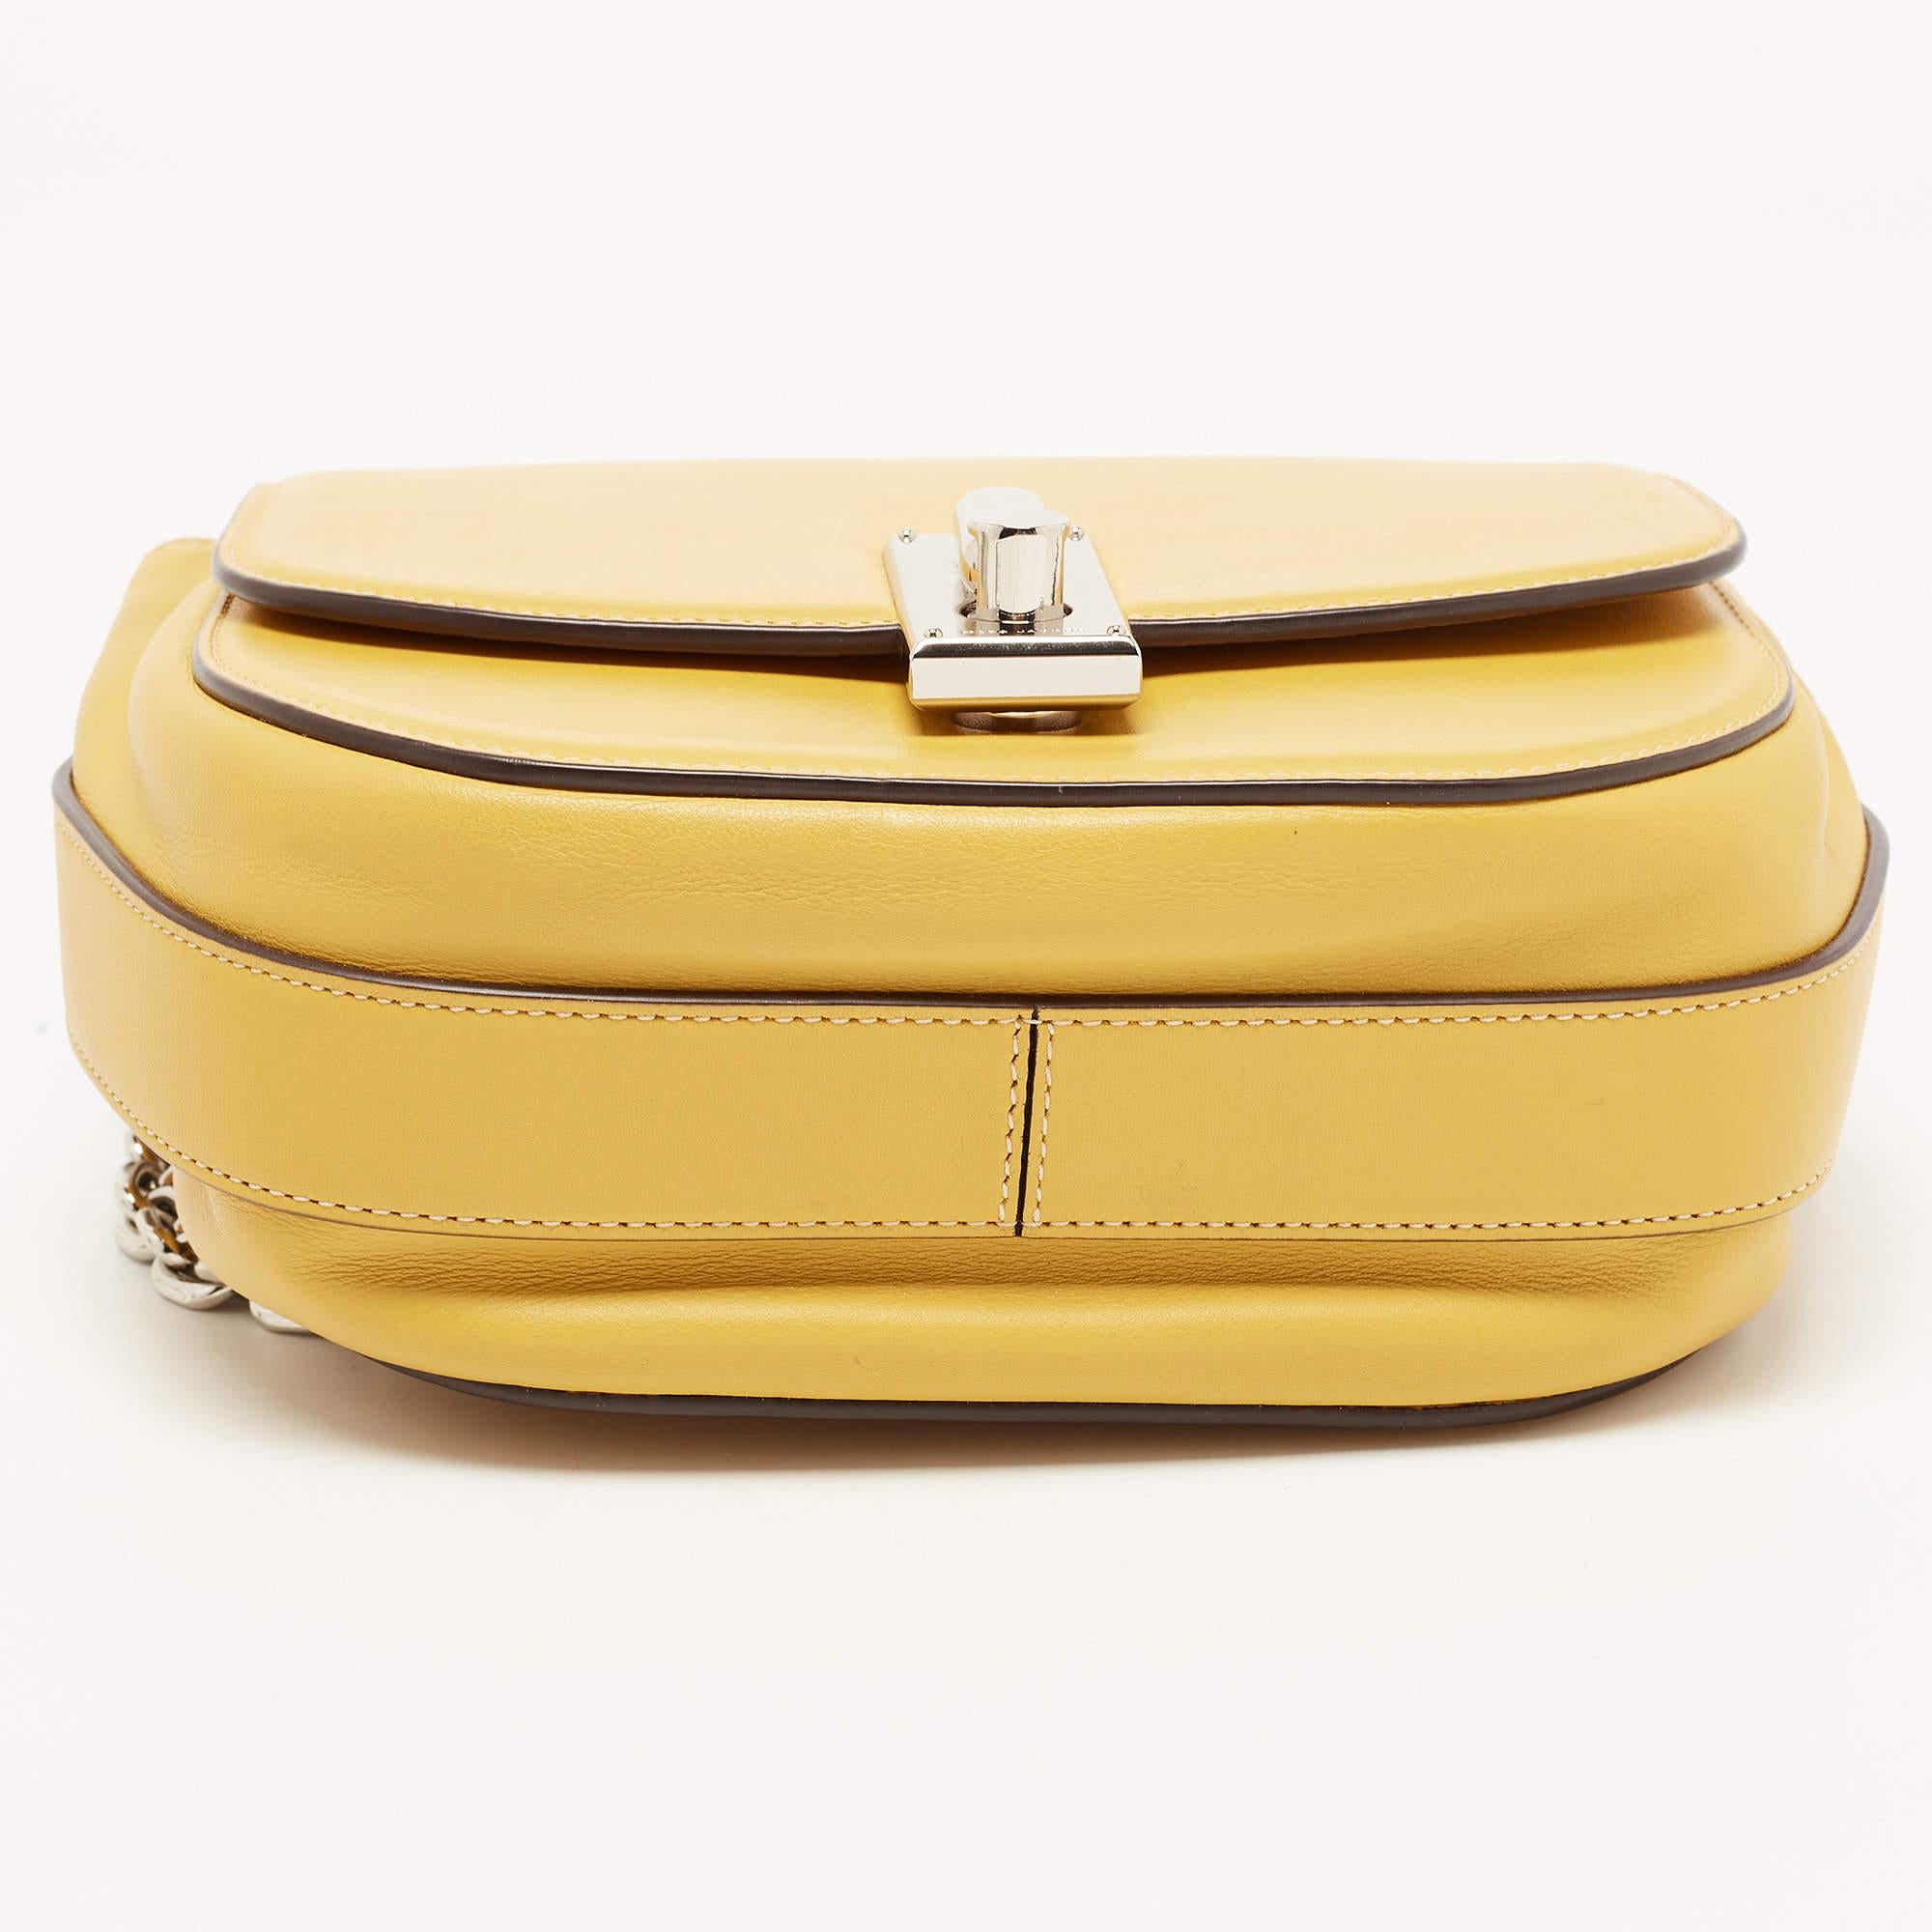 Marc Jacobs Yellow Leather West End The Jane Saddle Shoulder Bag 11